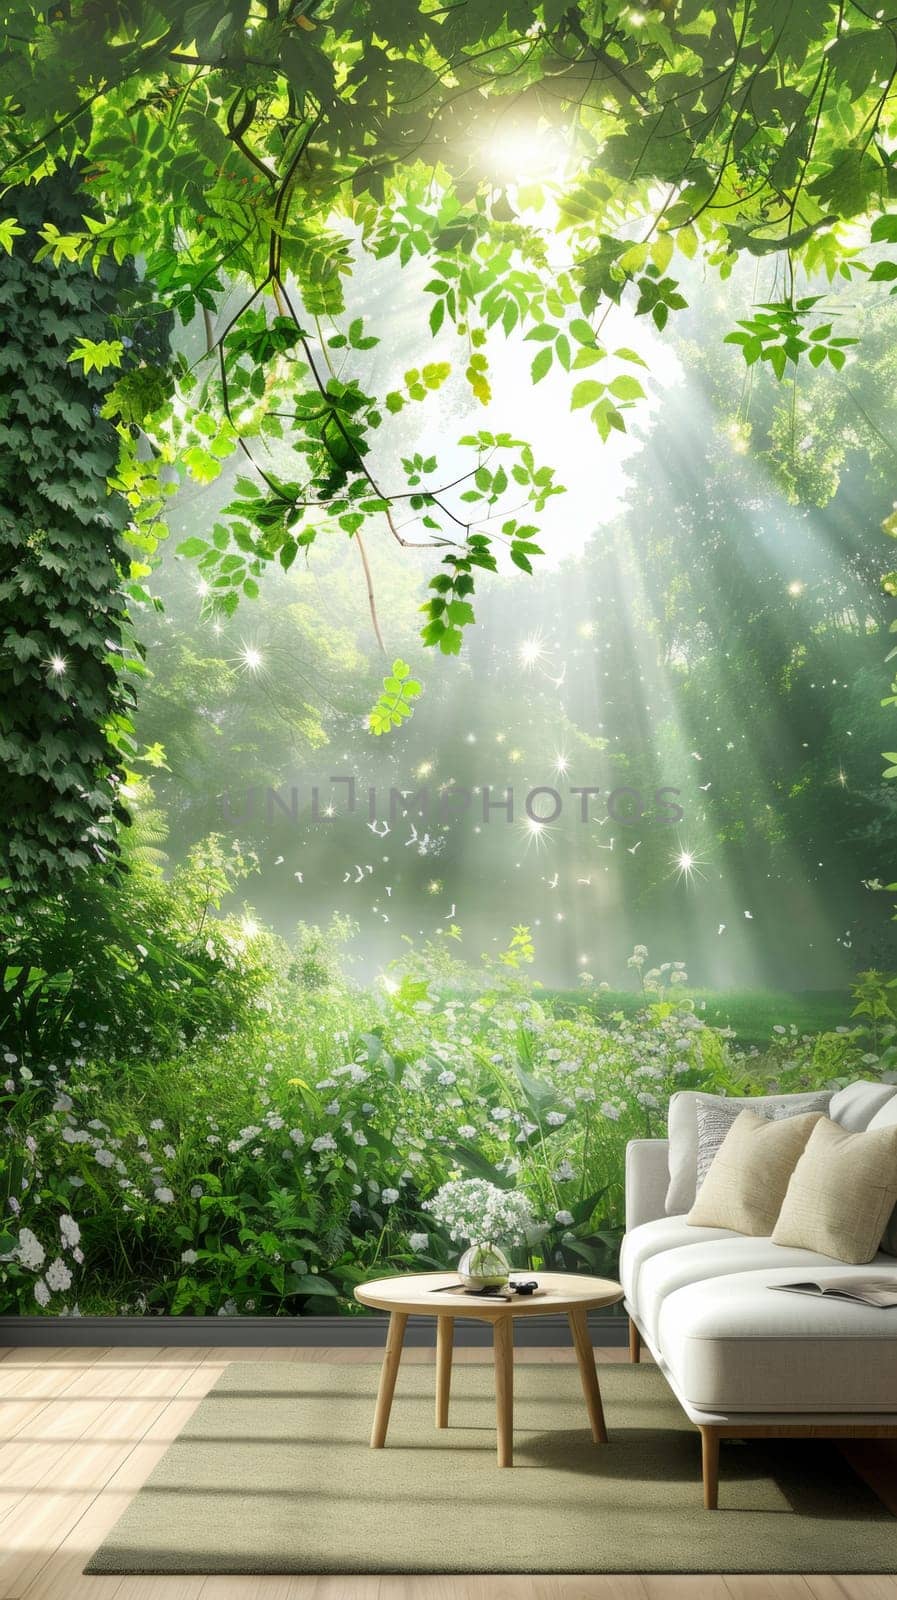 A couch sitting in front of a wall with trees and sun